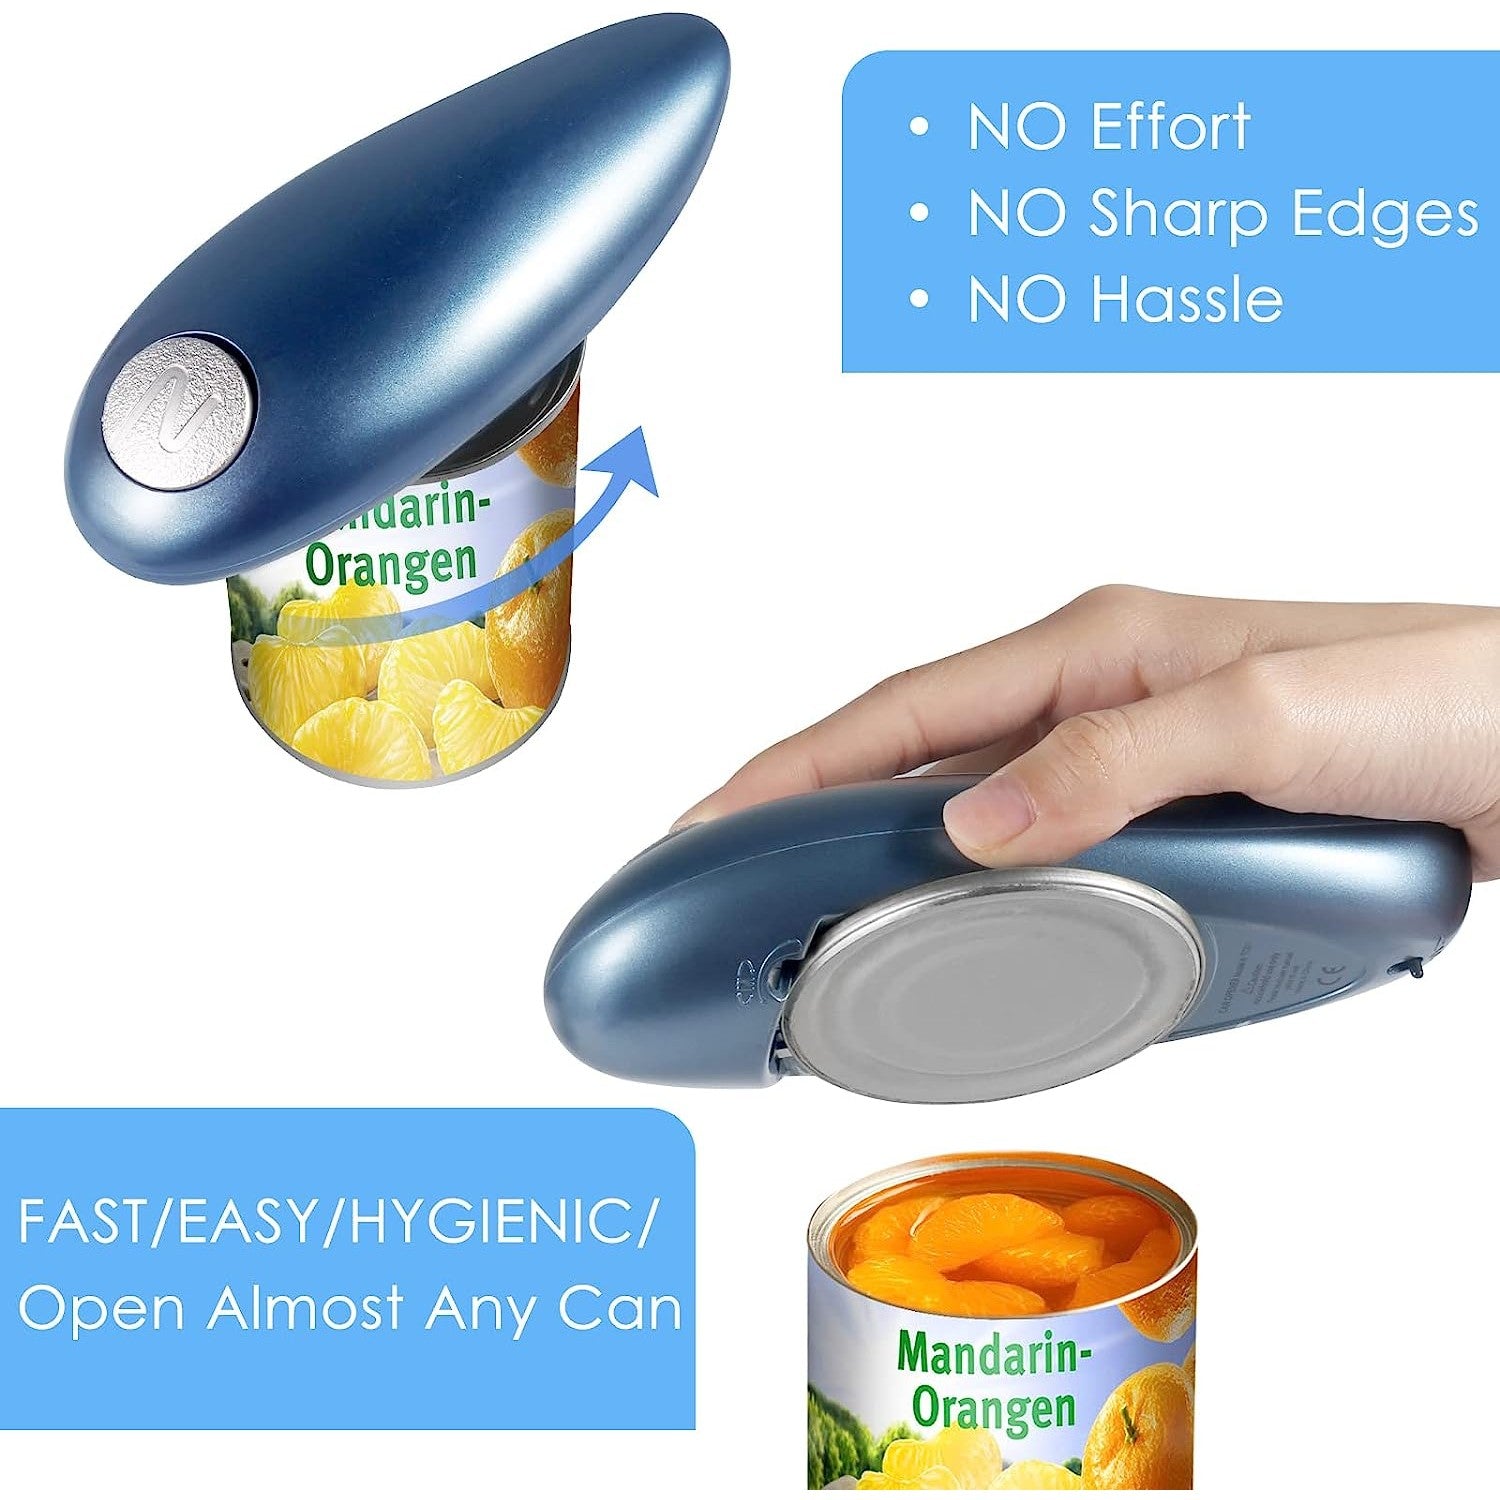 Electric Can Opener Automatic Tin Opener Canned Electric Bottle